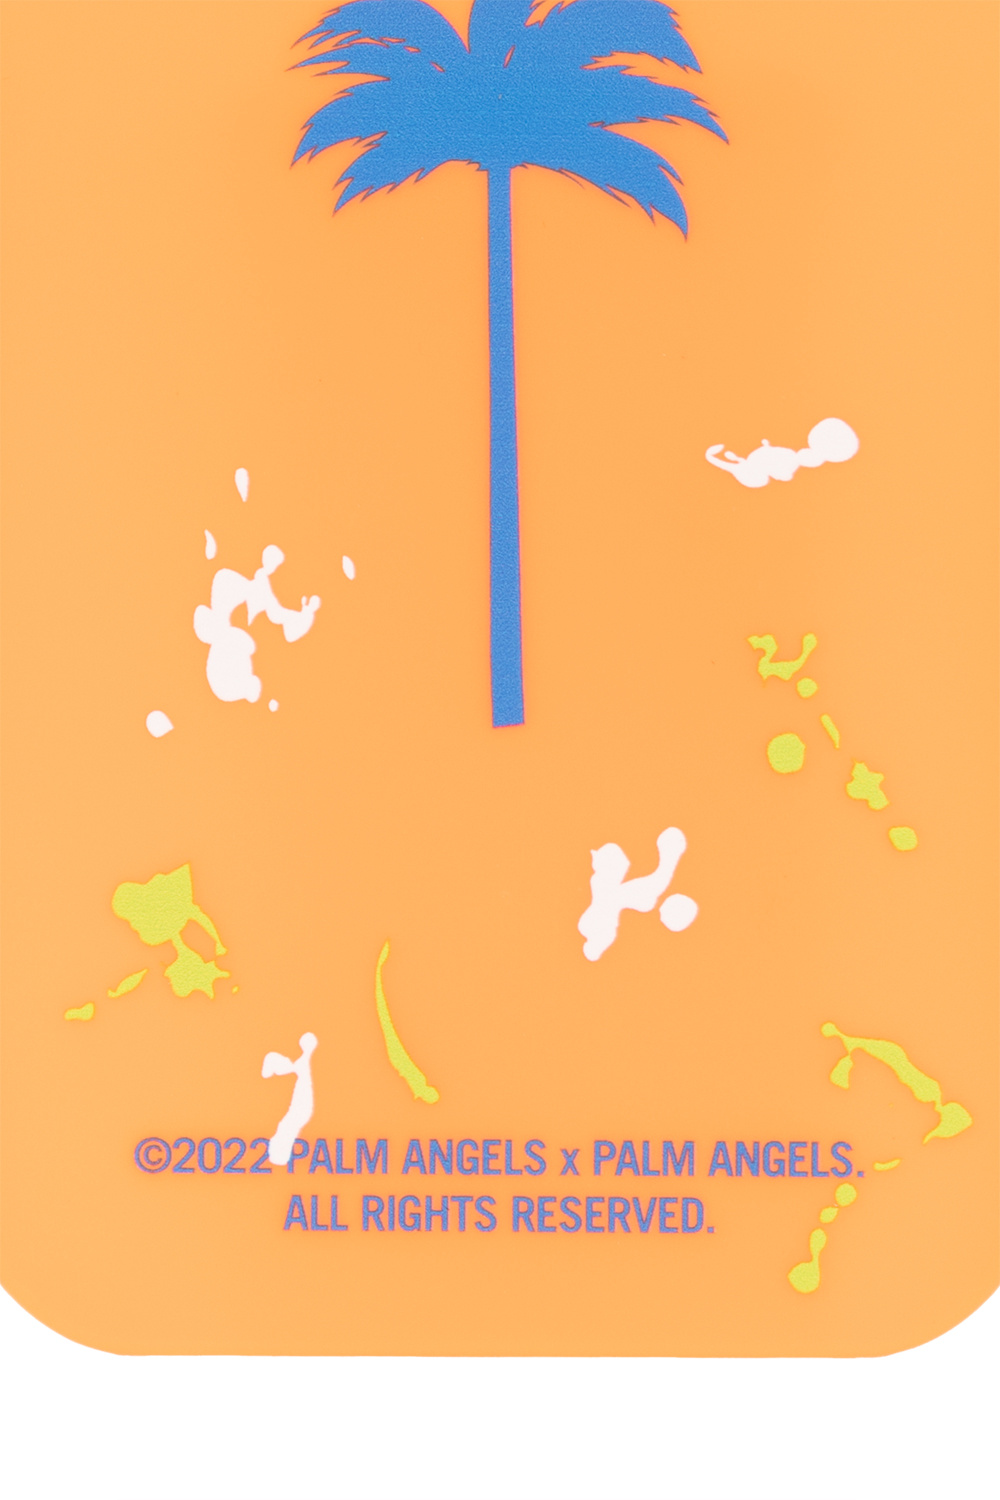 Palm Angels the hottest trend of the season